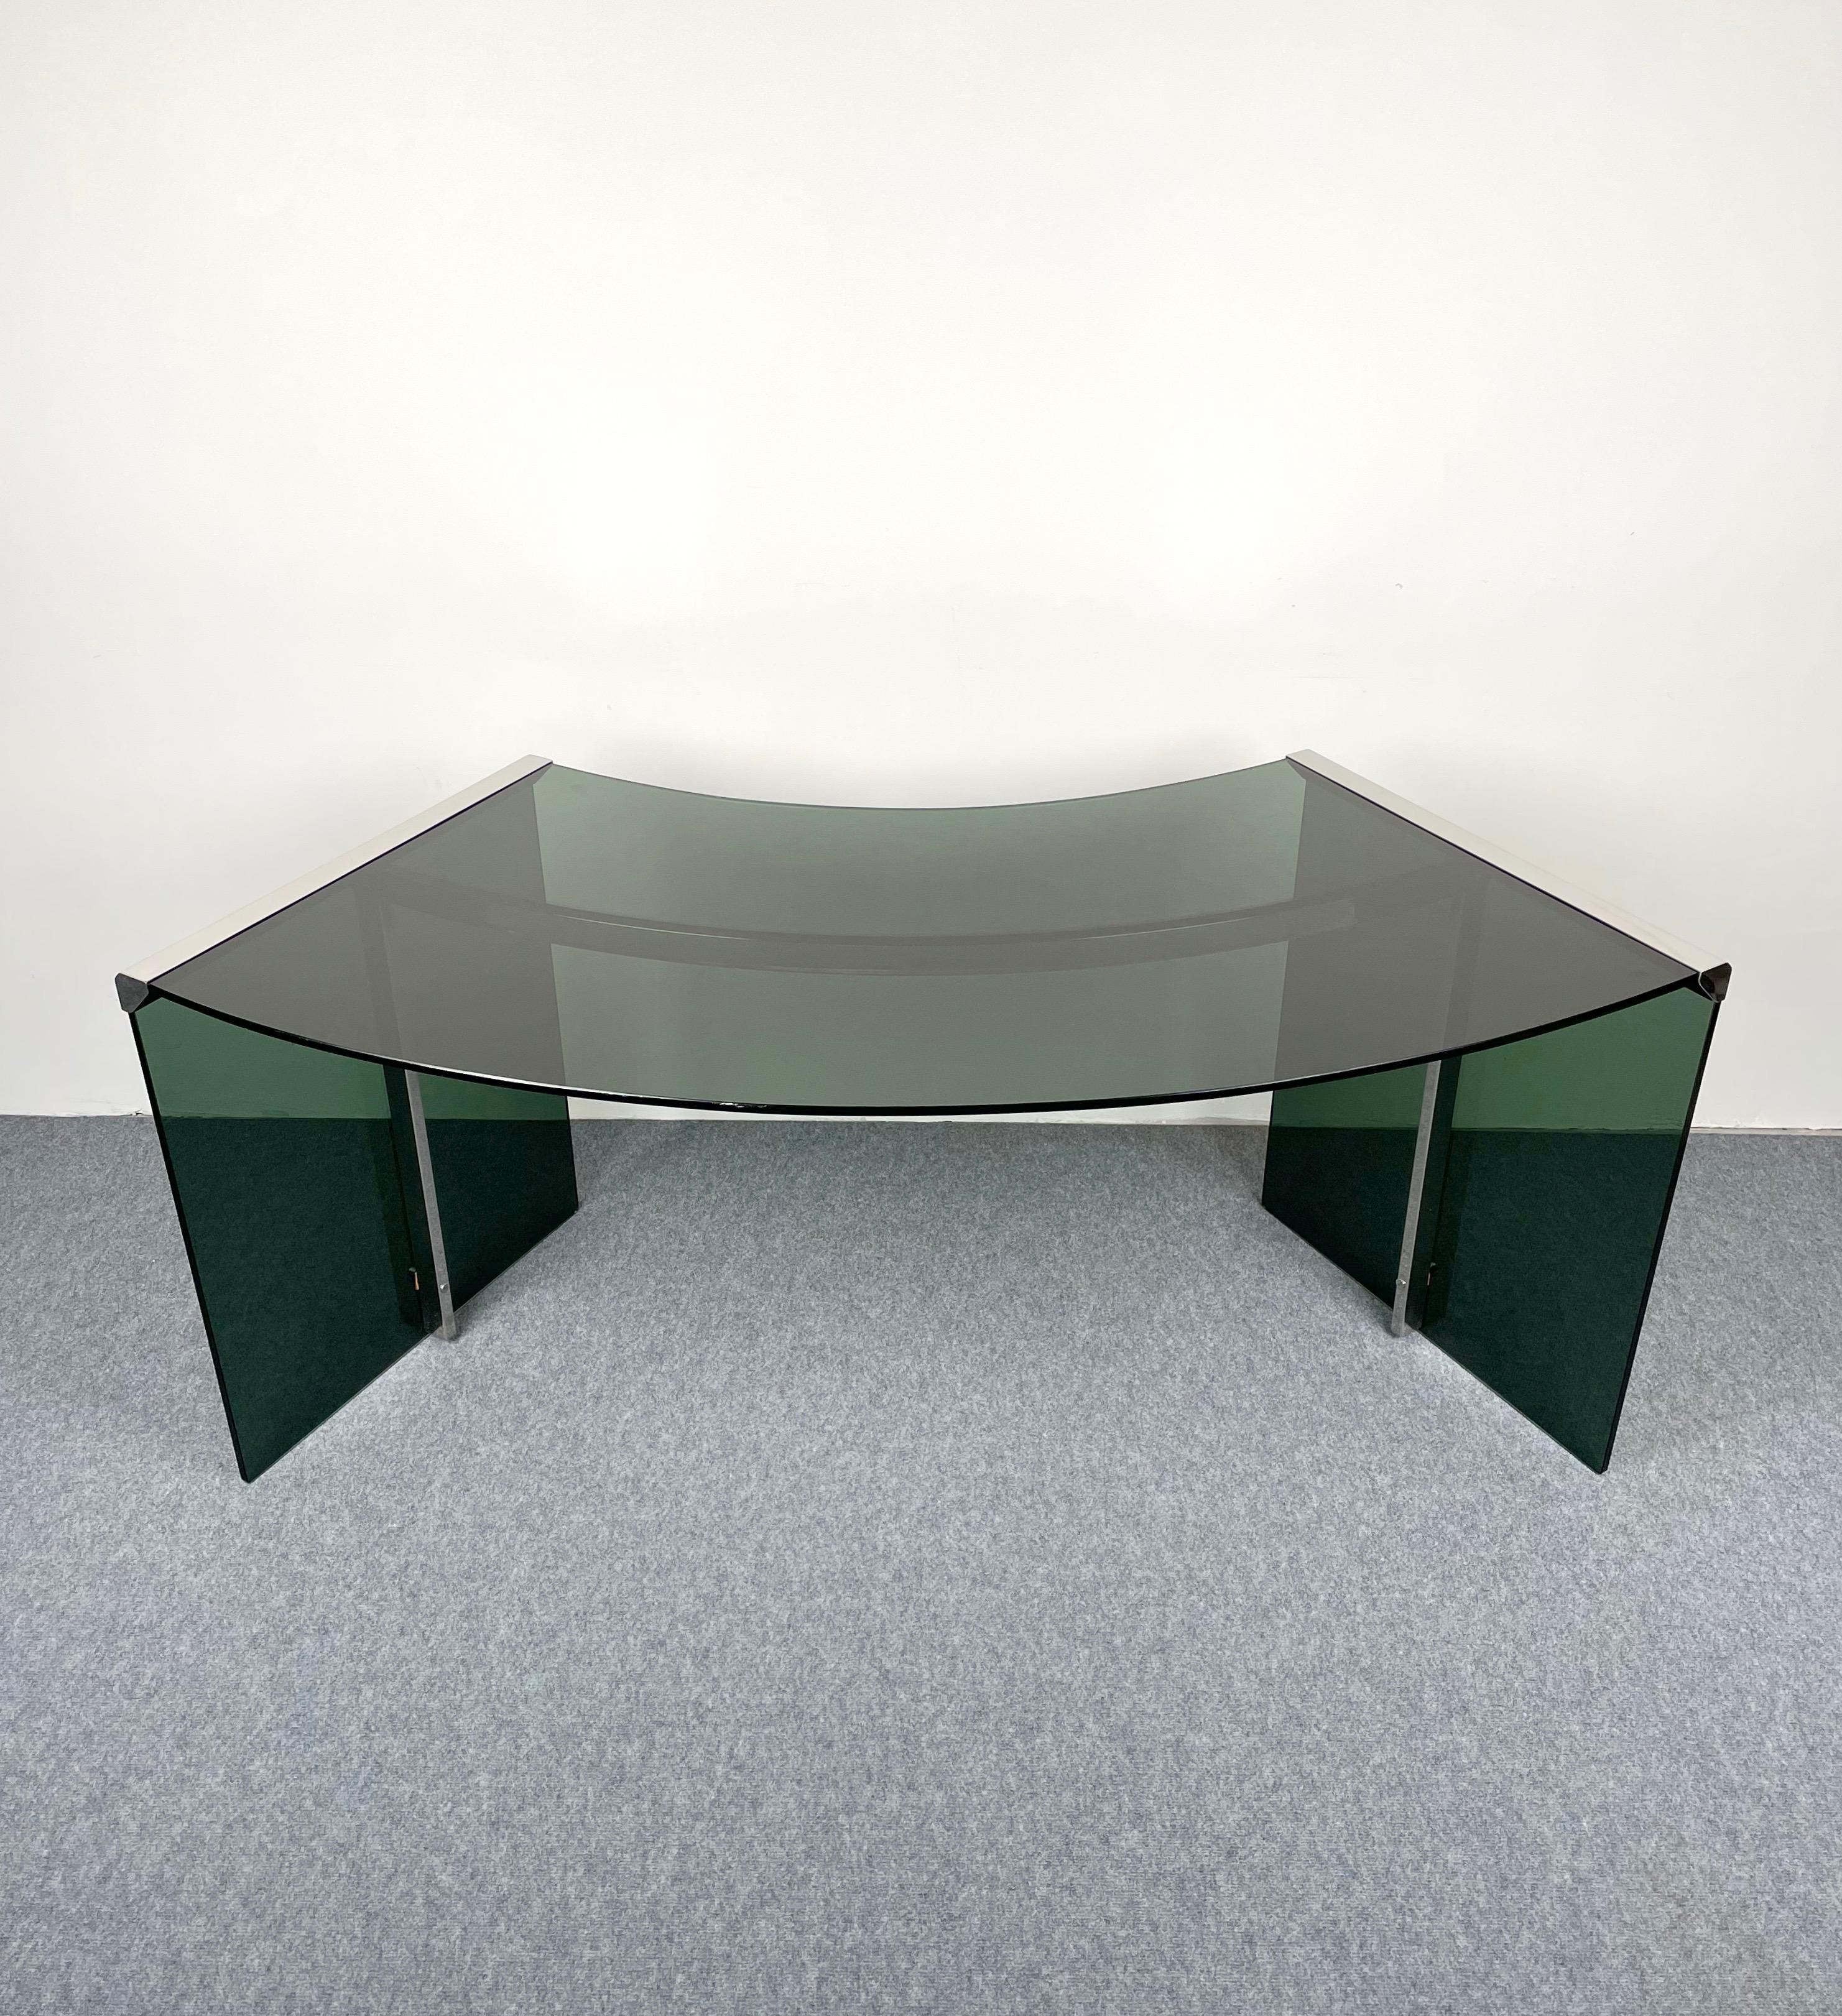 Designed in 1971 by Studio GR, this arc shaped dark smoked glass desk by Gallotti & Radice is named 